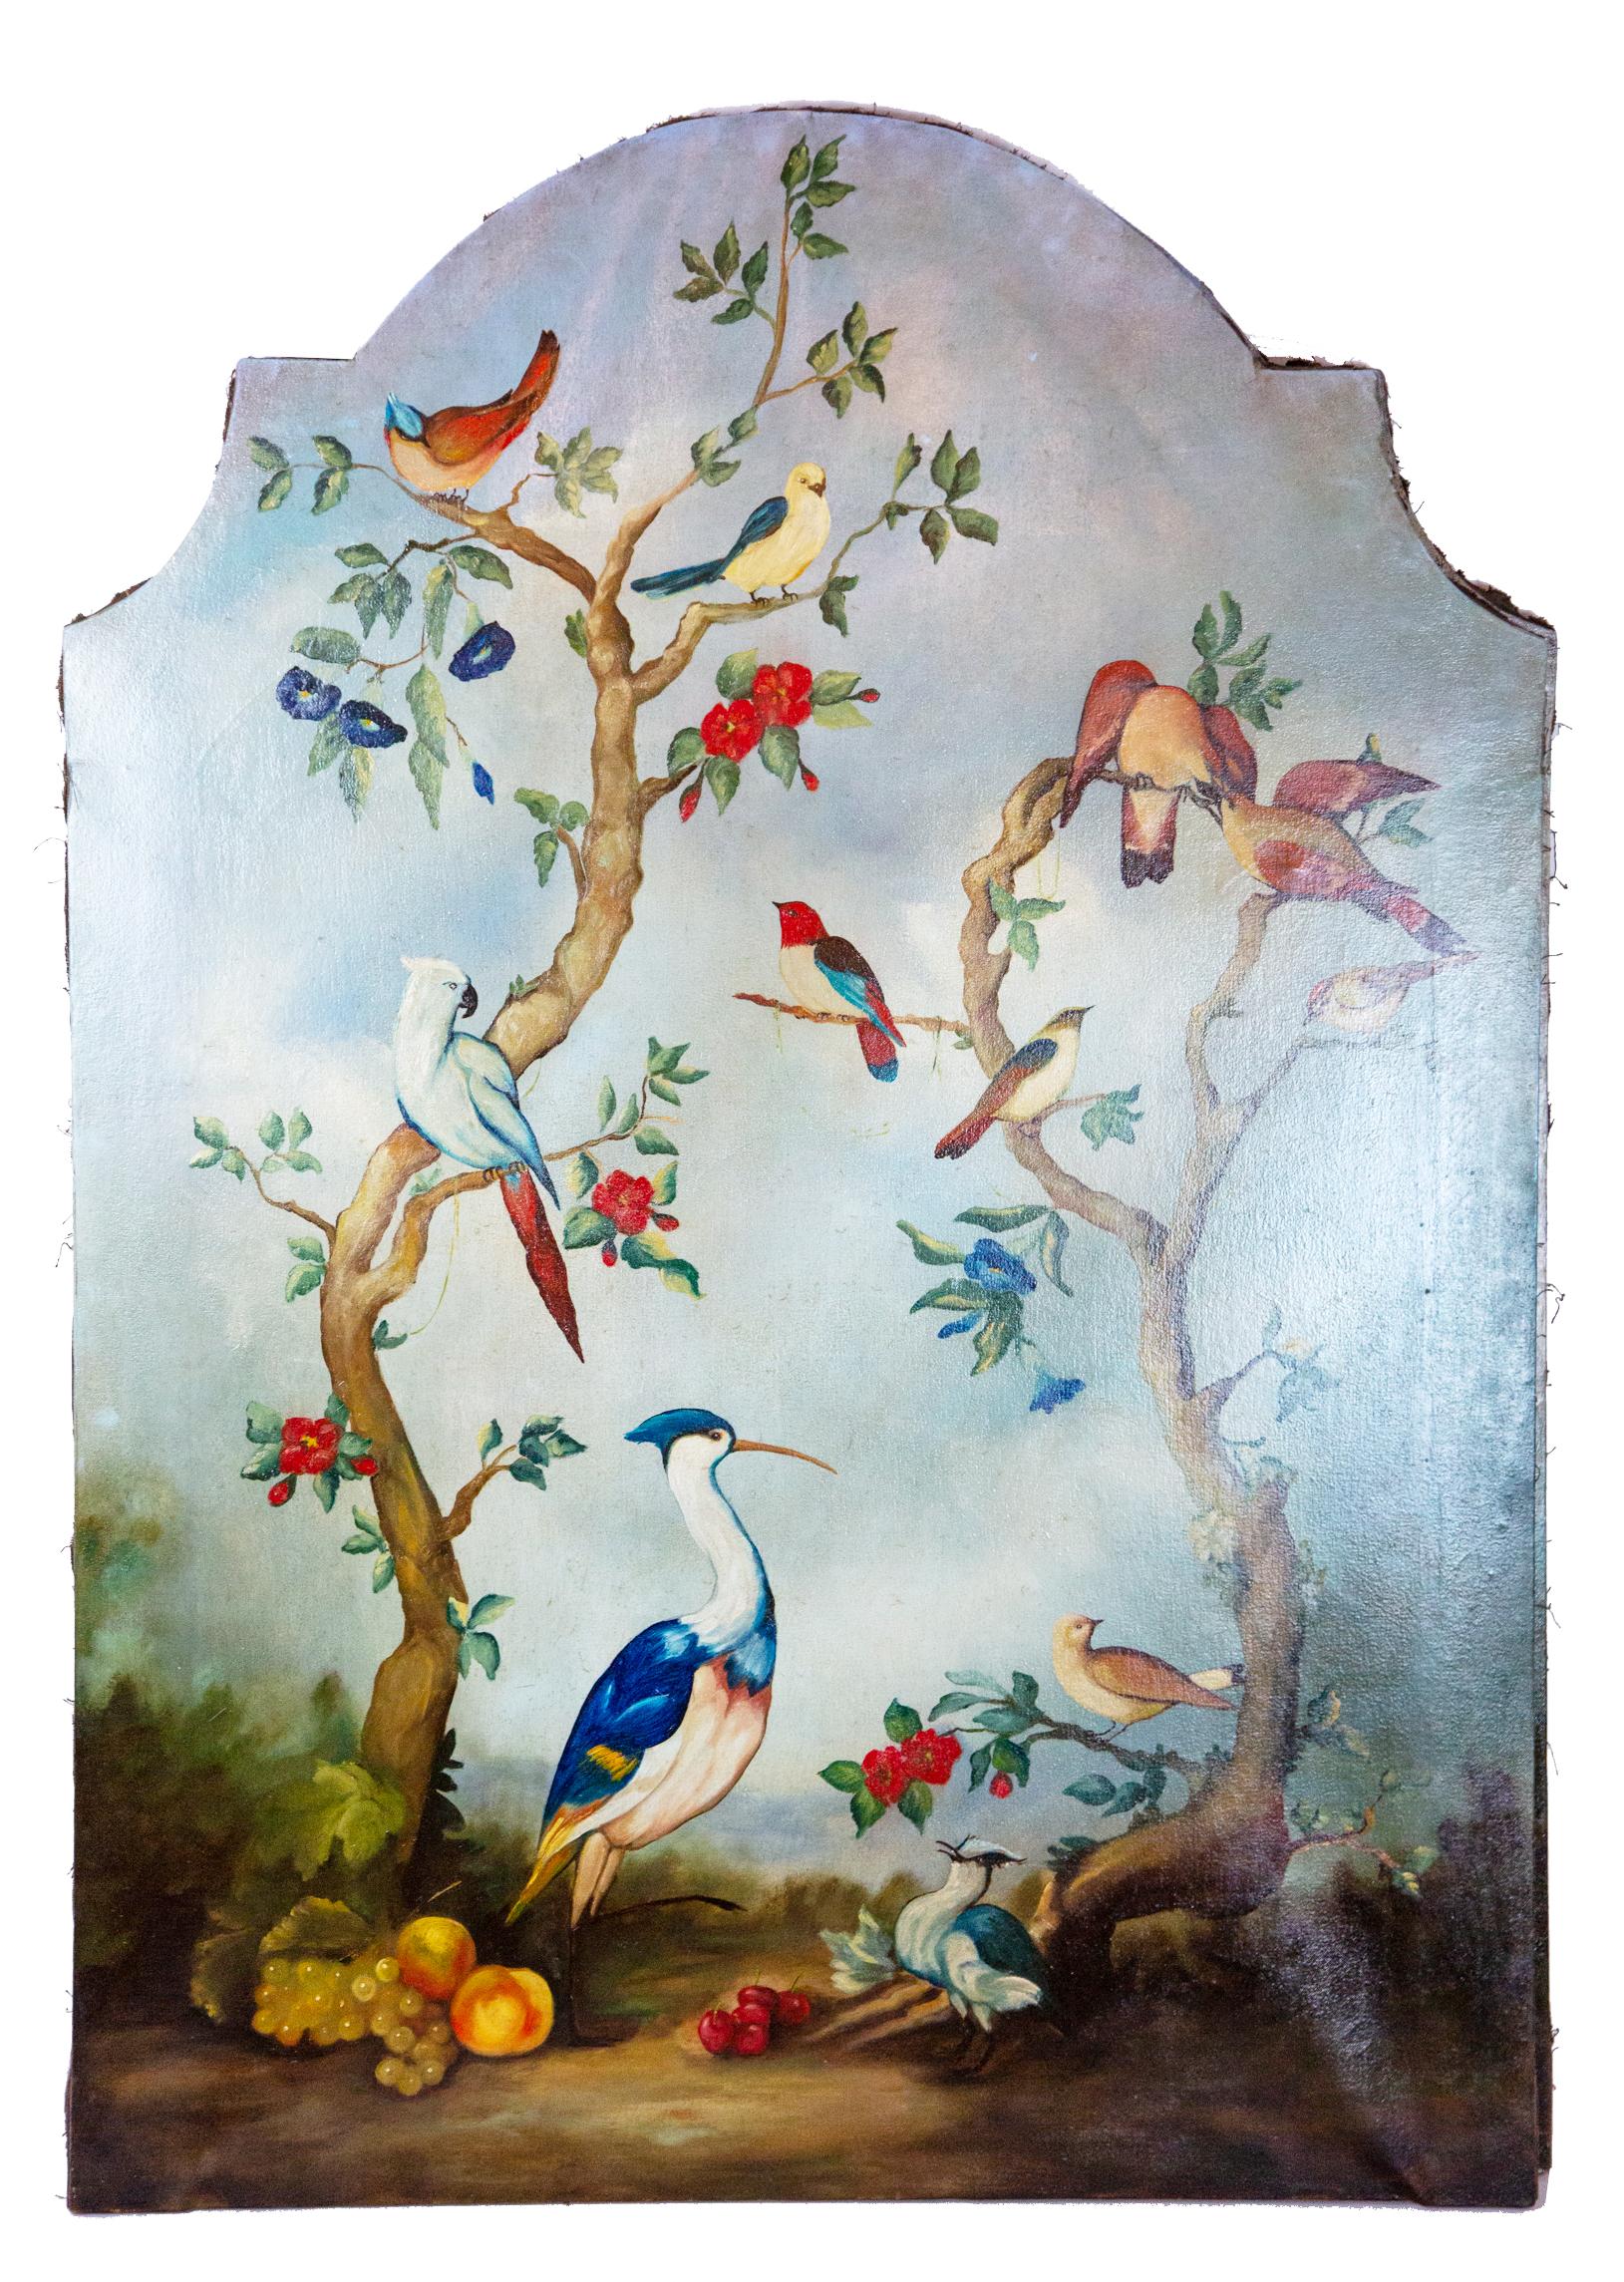 Pair of early 20th century painted birds and fruits on canvas. Two large paintings with colorful tropical birds sitting on trees with fruit beneath. Painted on stretched canvas. Measures: 50